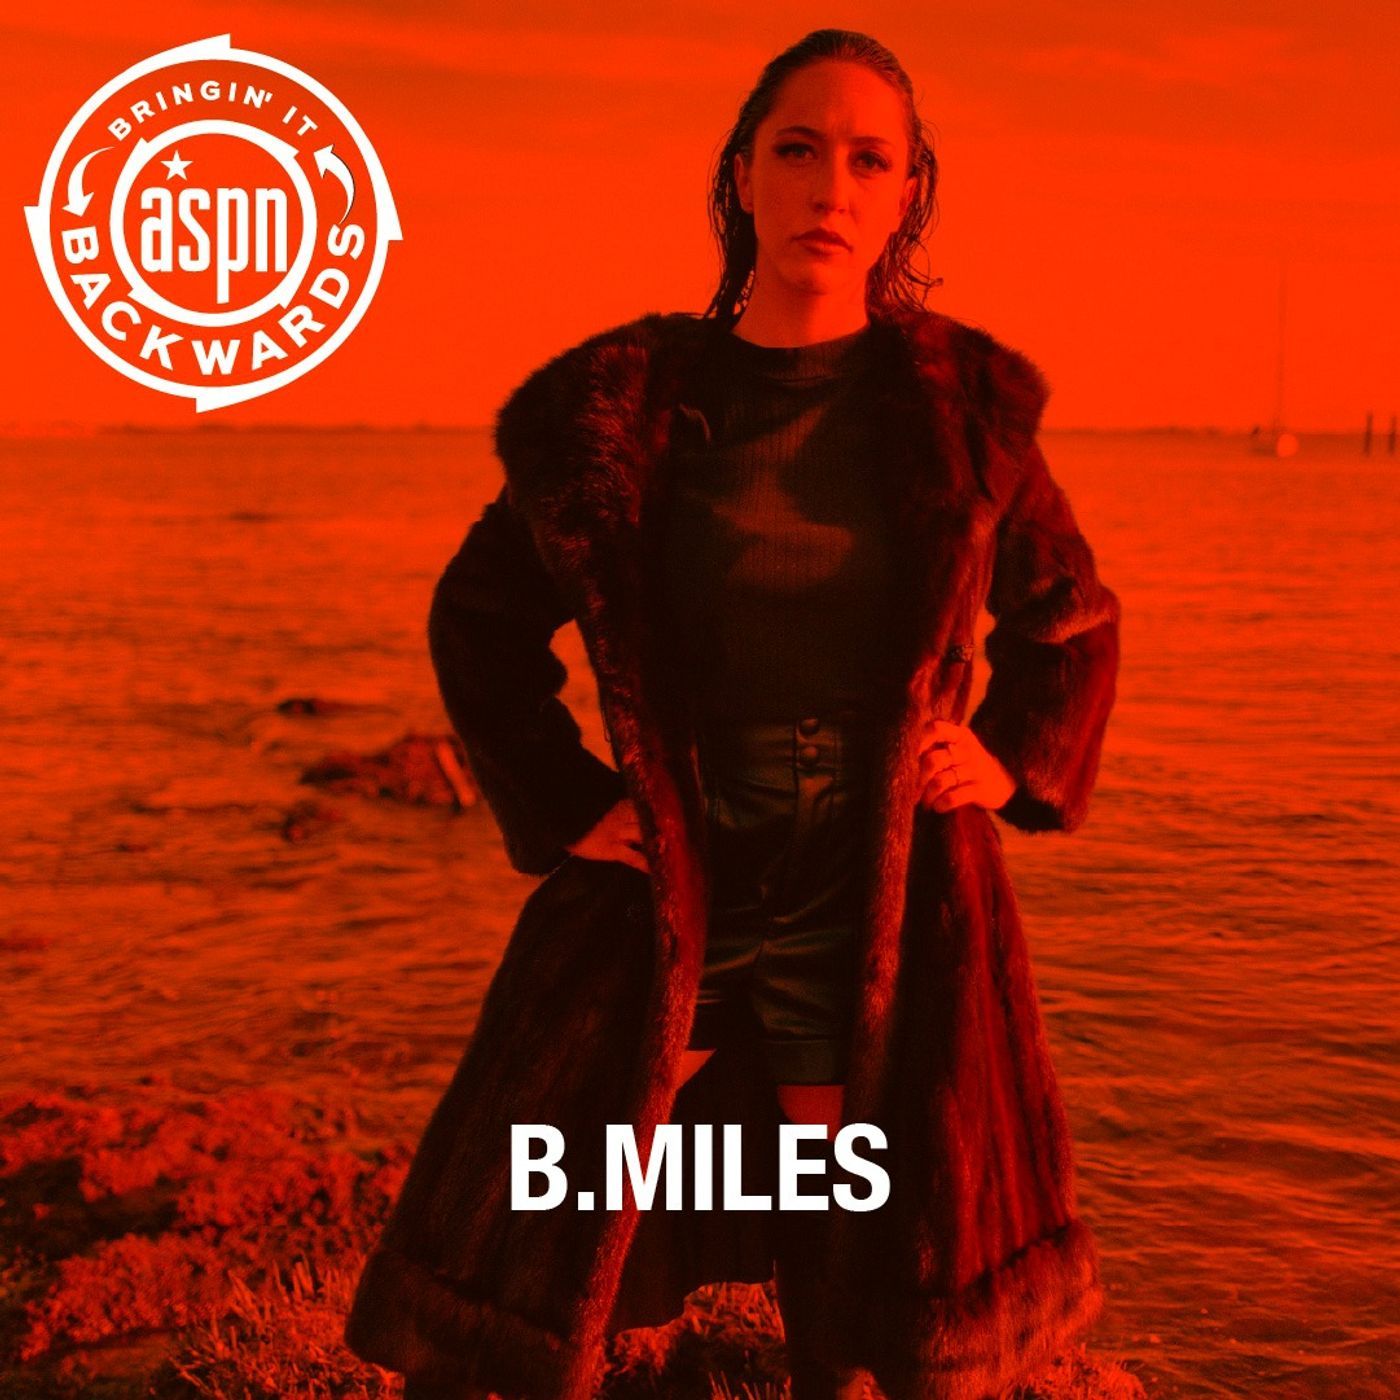 Interview with B.Miles Image